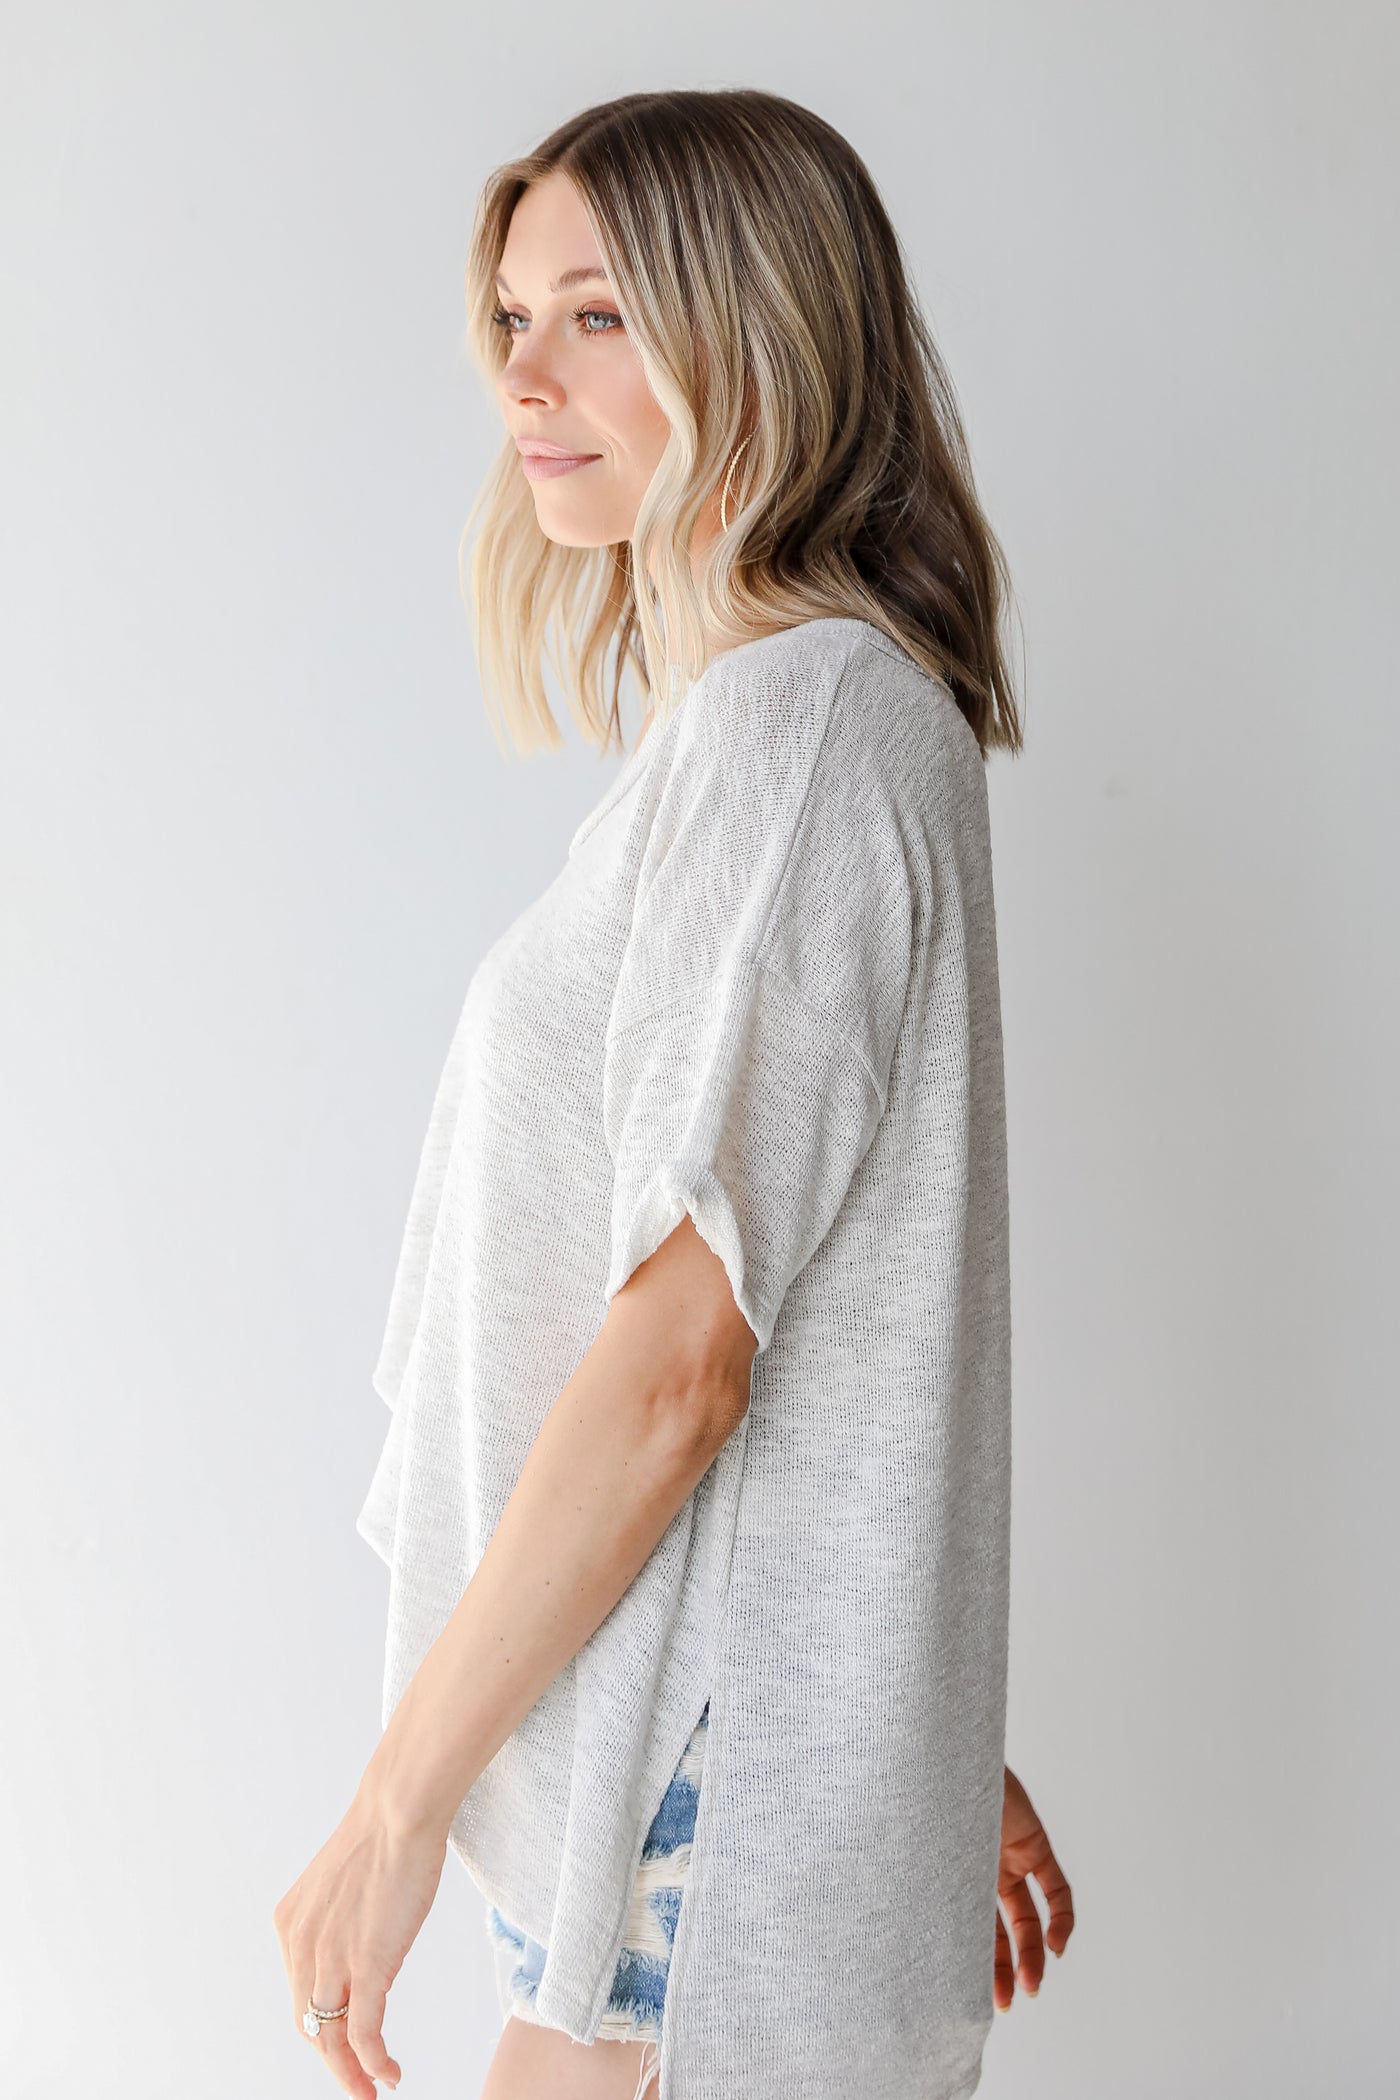 Knit Tee in heather grey side view